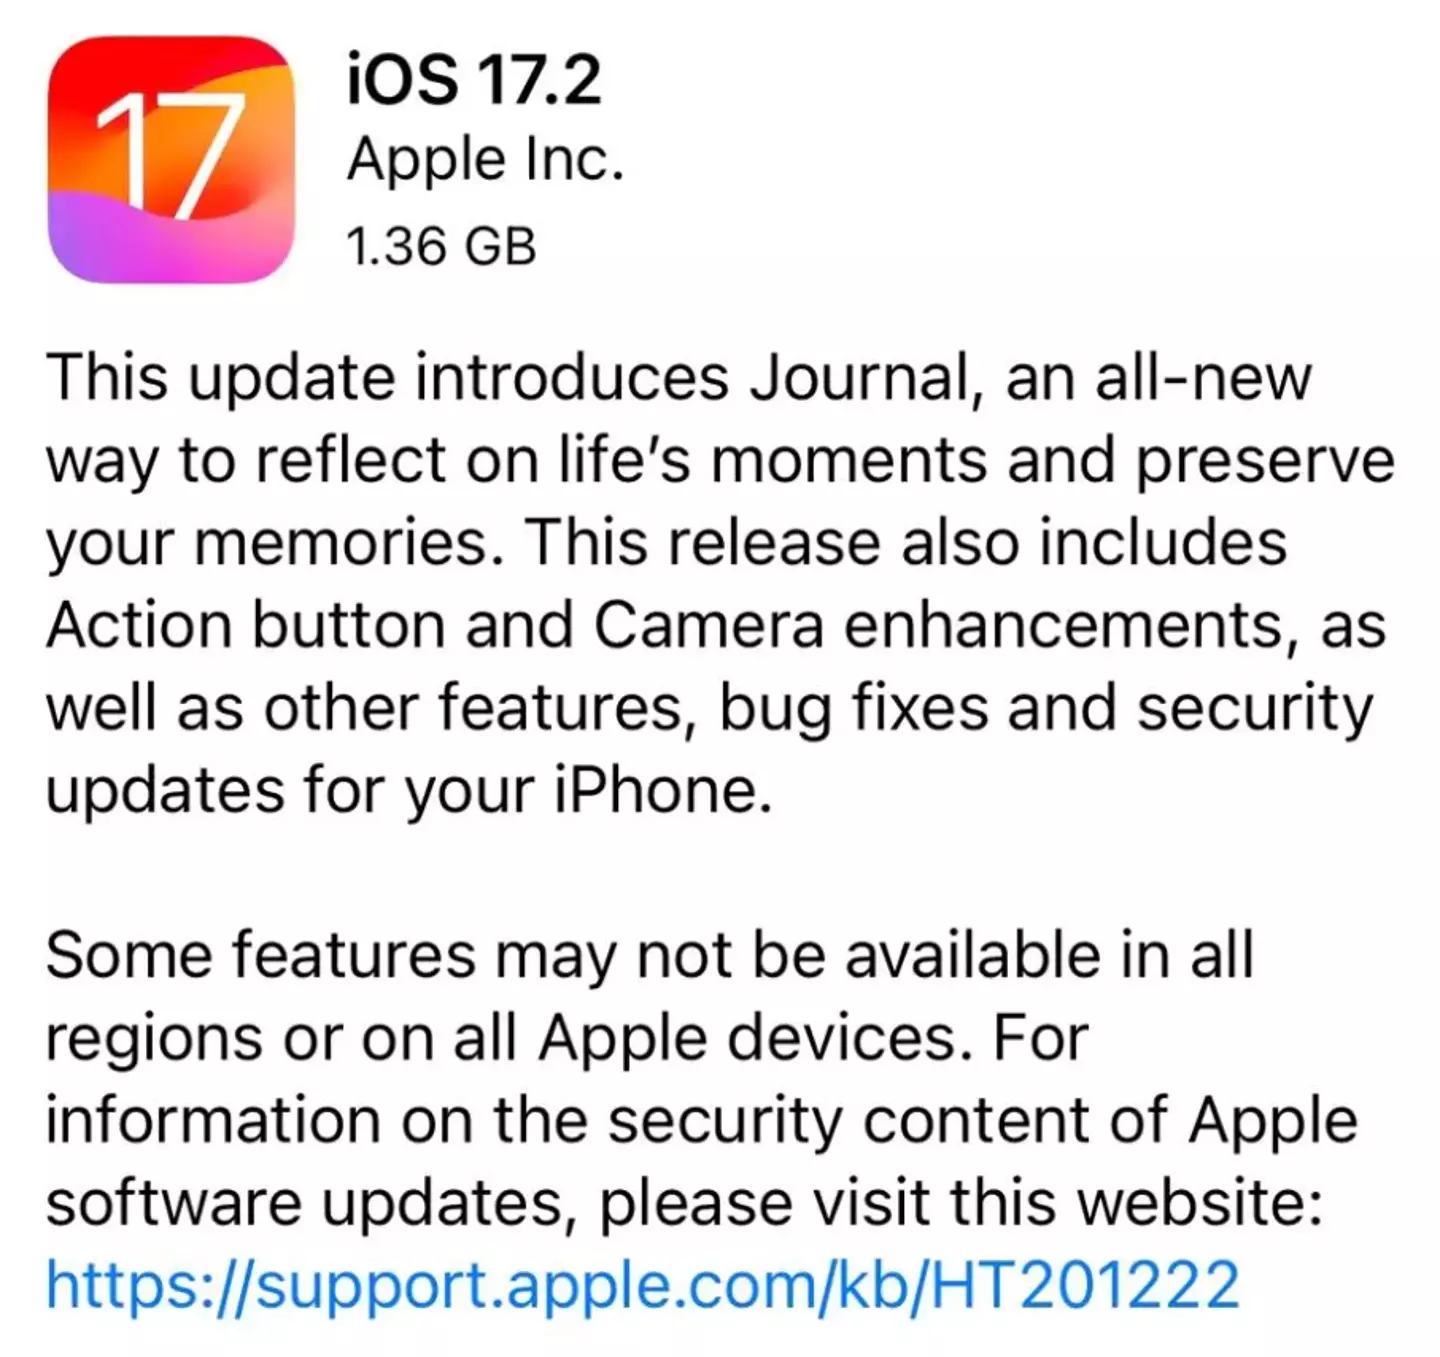 Apple released Journal as part of its iOS 17.2 update.